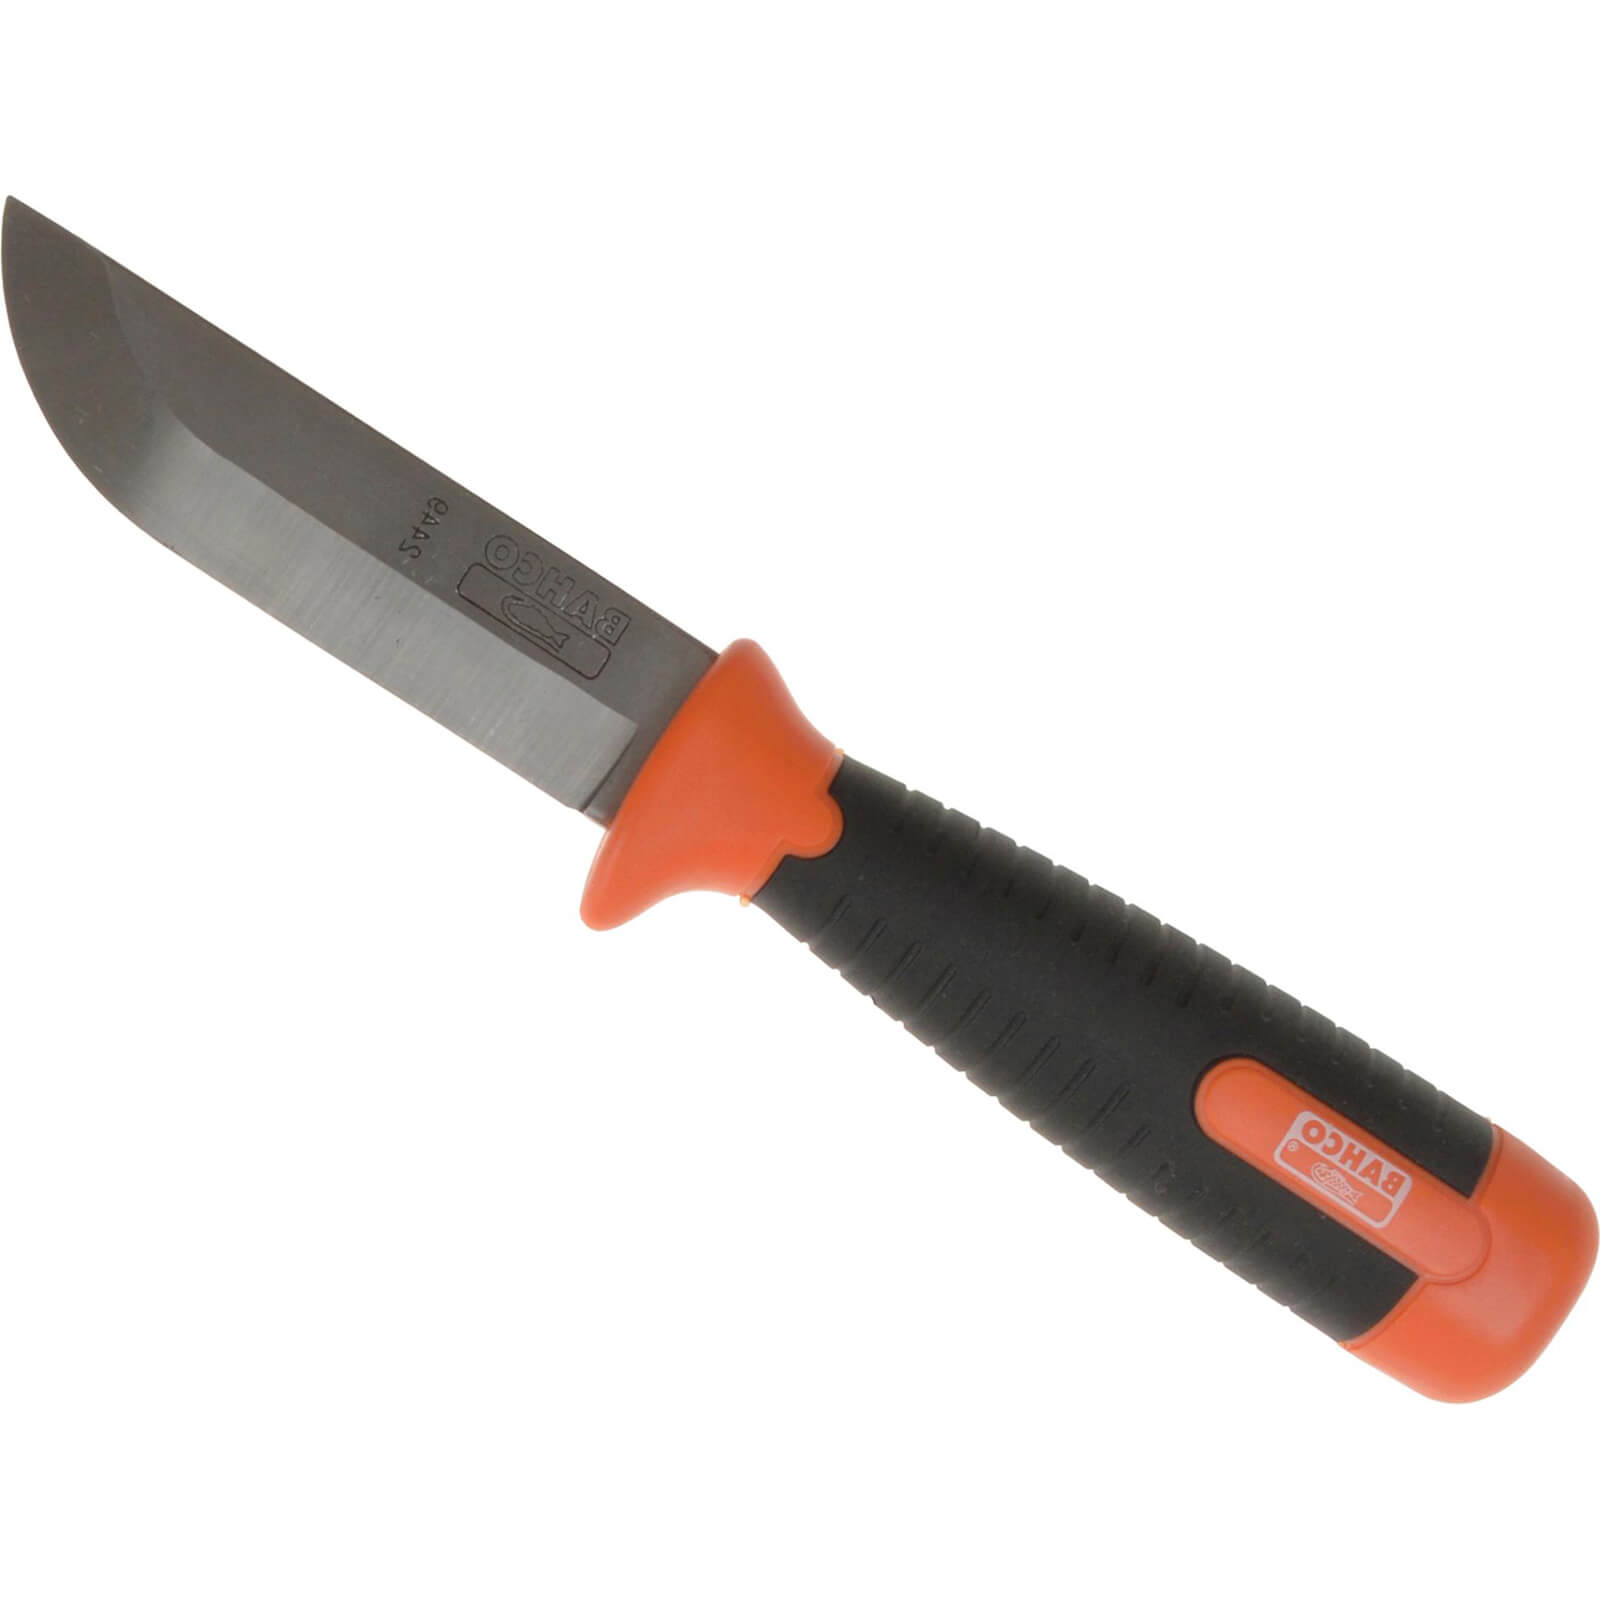 Bahco 3 in 1 Curved Blade Wrecking Knife